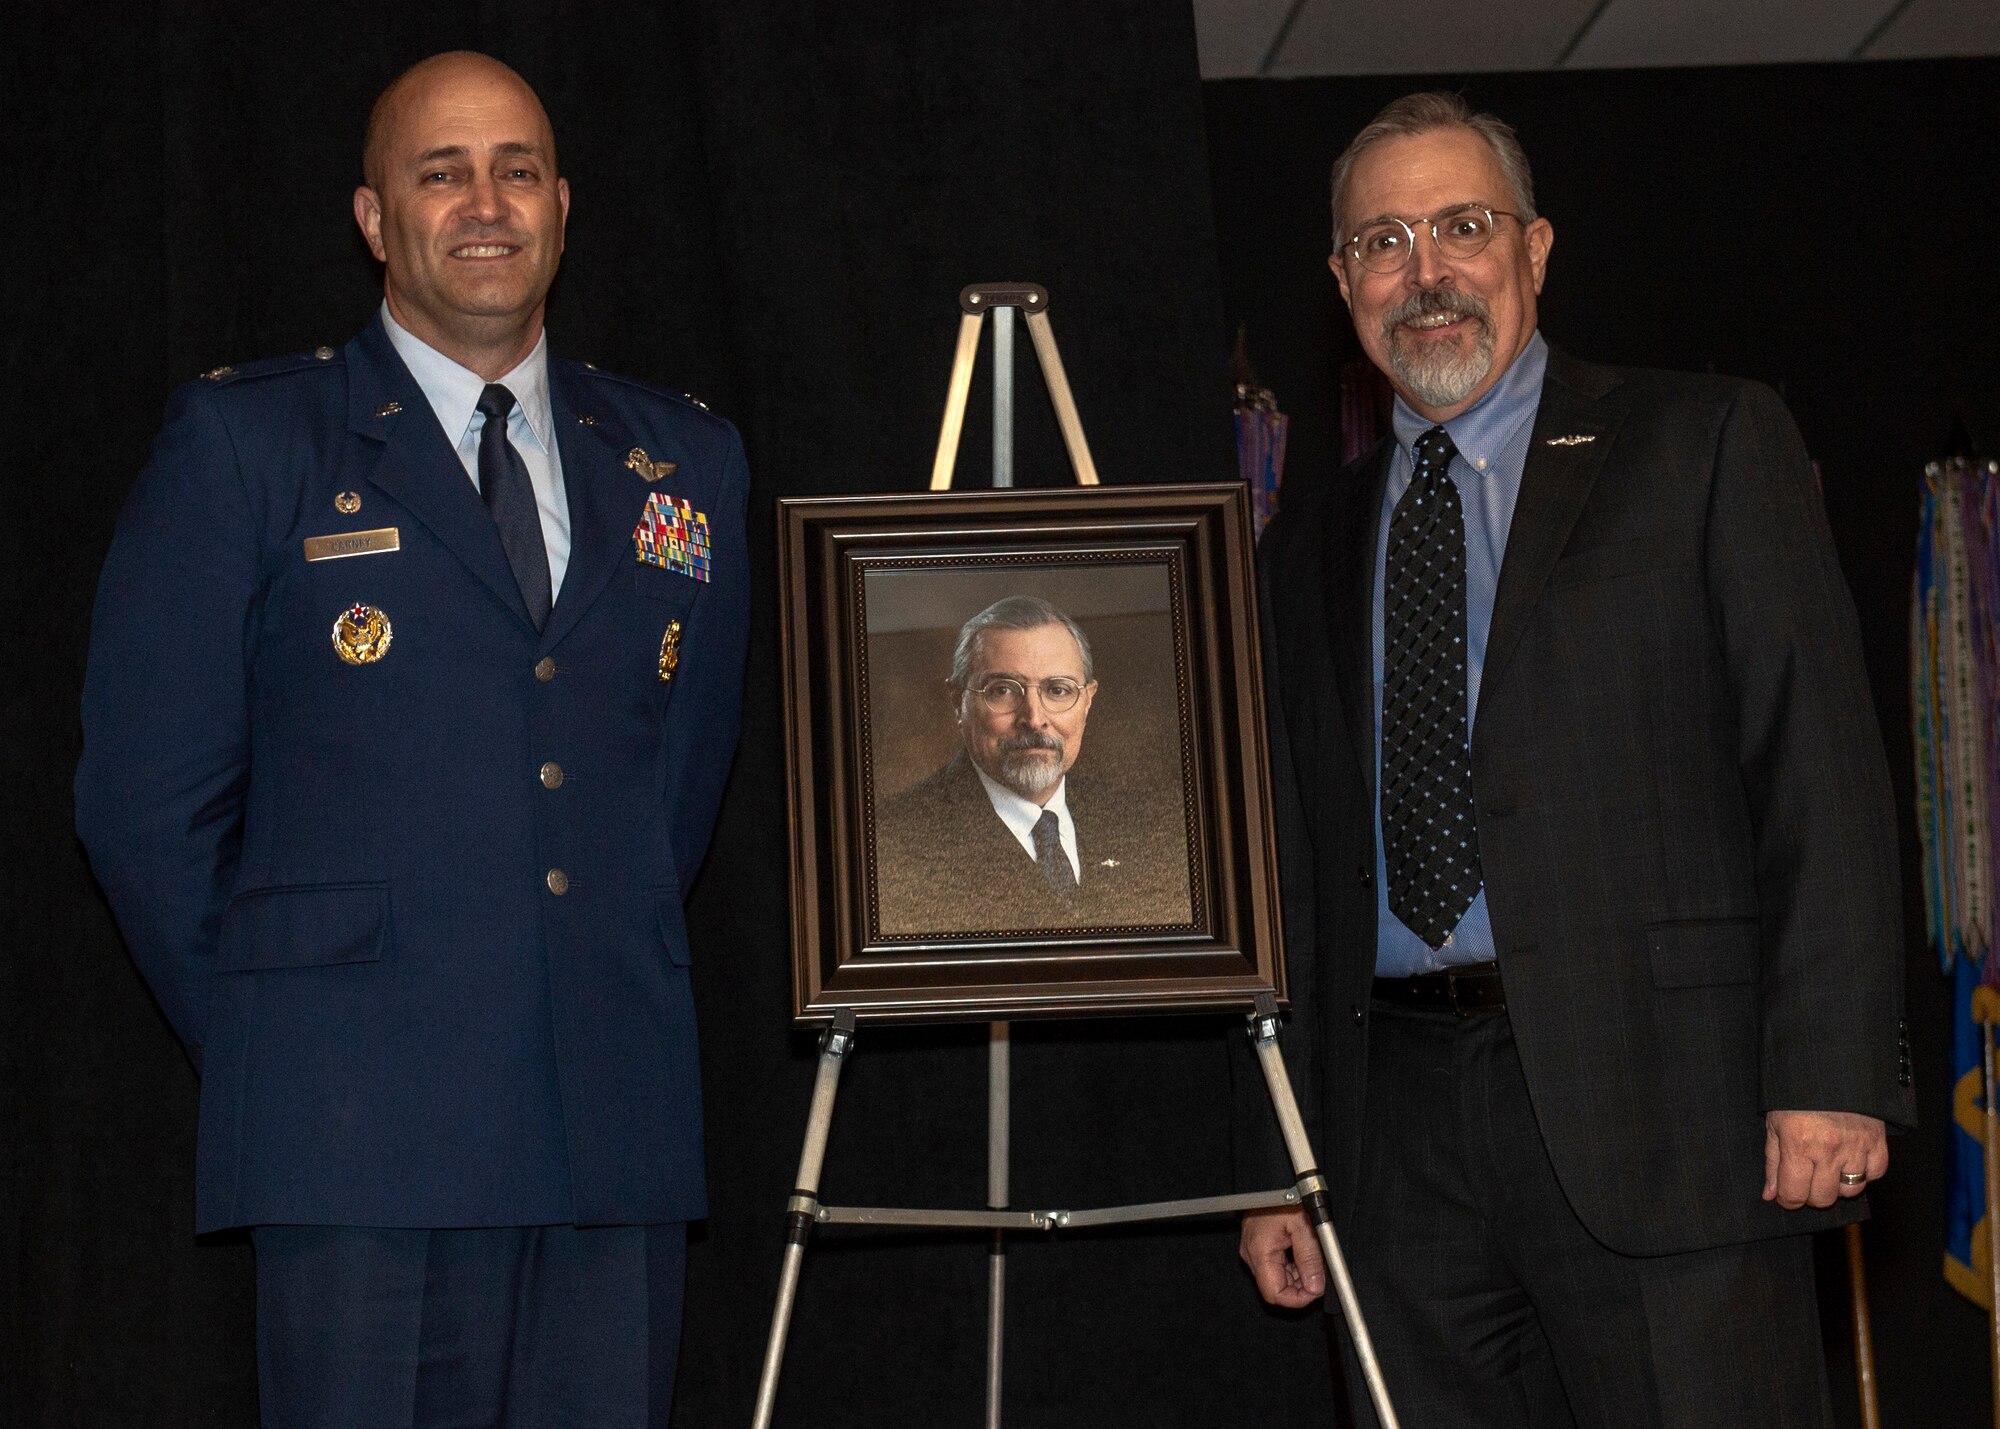 U.S. Air Force Col. Eric Carney, 97th Air Mobility Wing commander, and Jim Gover, president of Lending and Corporate Security Officer at NBC Bank in Altus, stand by his portrait during the friends of Altus Induction Ceremony, March 29, 2019, at Altus Air Force Base, Okla. The portrait will be hung in the Wing command building along with the other Friends of Altus. (U.S. Air Force Photo by Senior Airman Jackson N. Haddon Jackson N. Haddon)